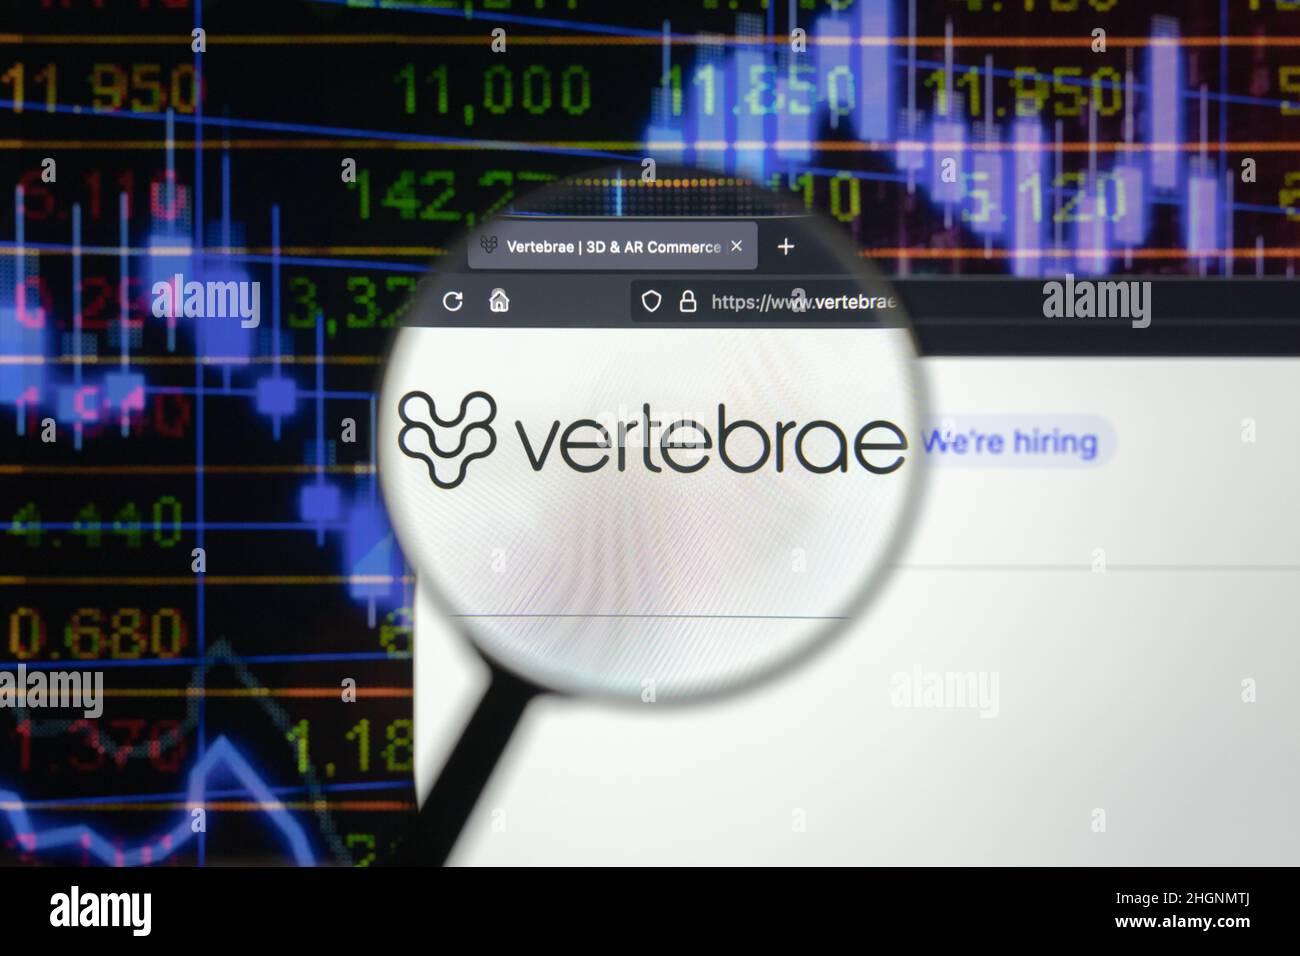 Vertebrae company logo on a website with blurry stock market developments in the background, seen on a computer screen through a magnifying glass. Stock Photo